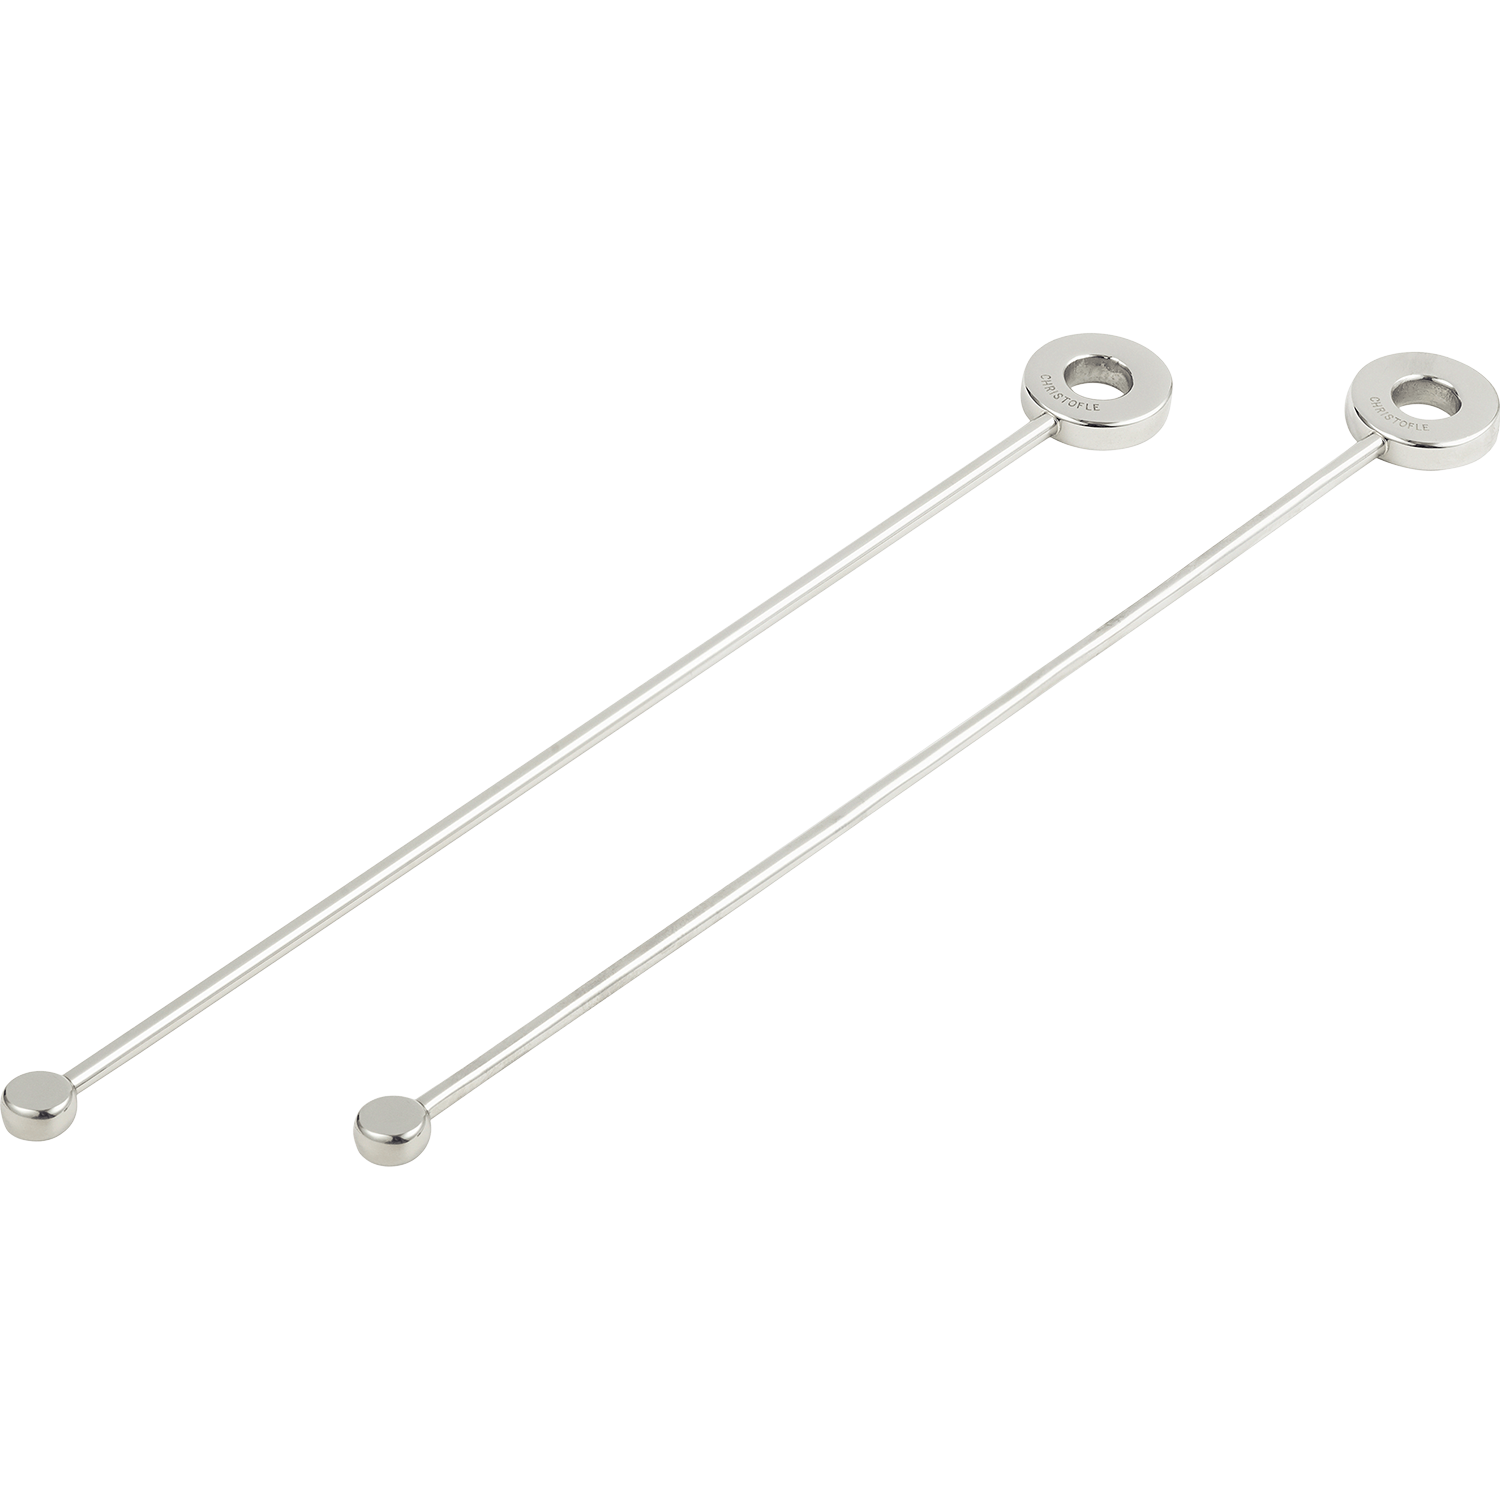 Set of 2 Stainless Steel cocktail stirrers